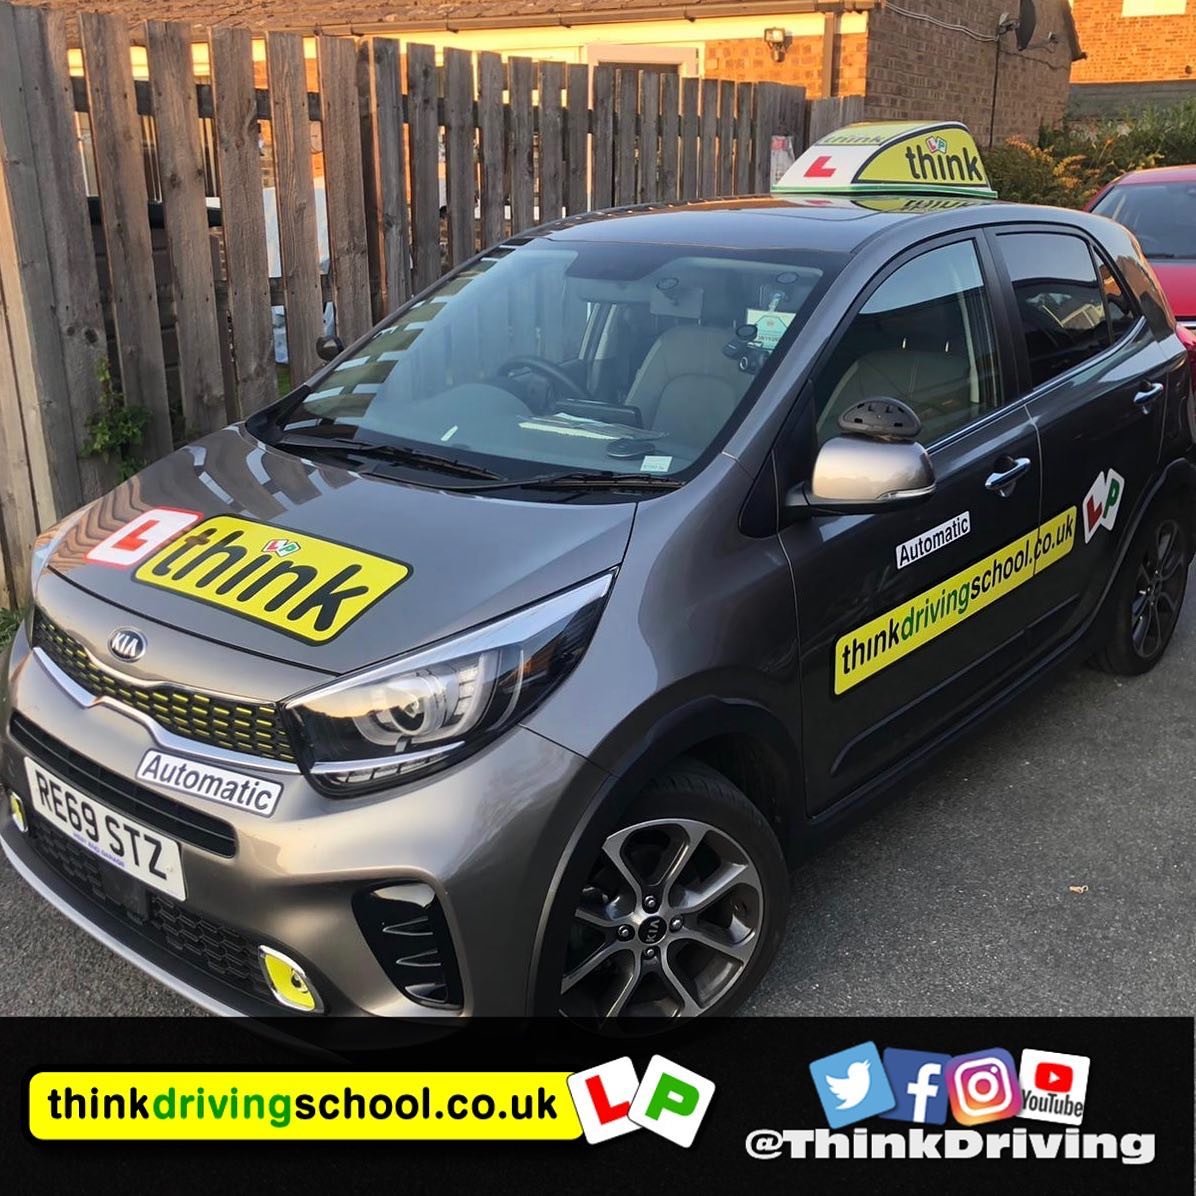 driving lessons Bracknell Stephen Towell think driving school Toyota Yaris